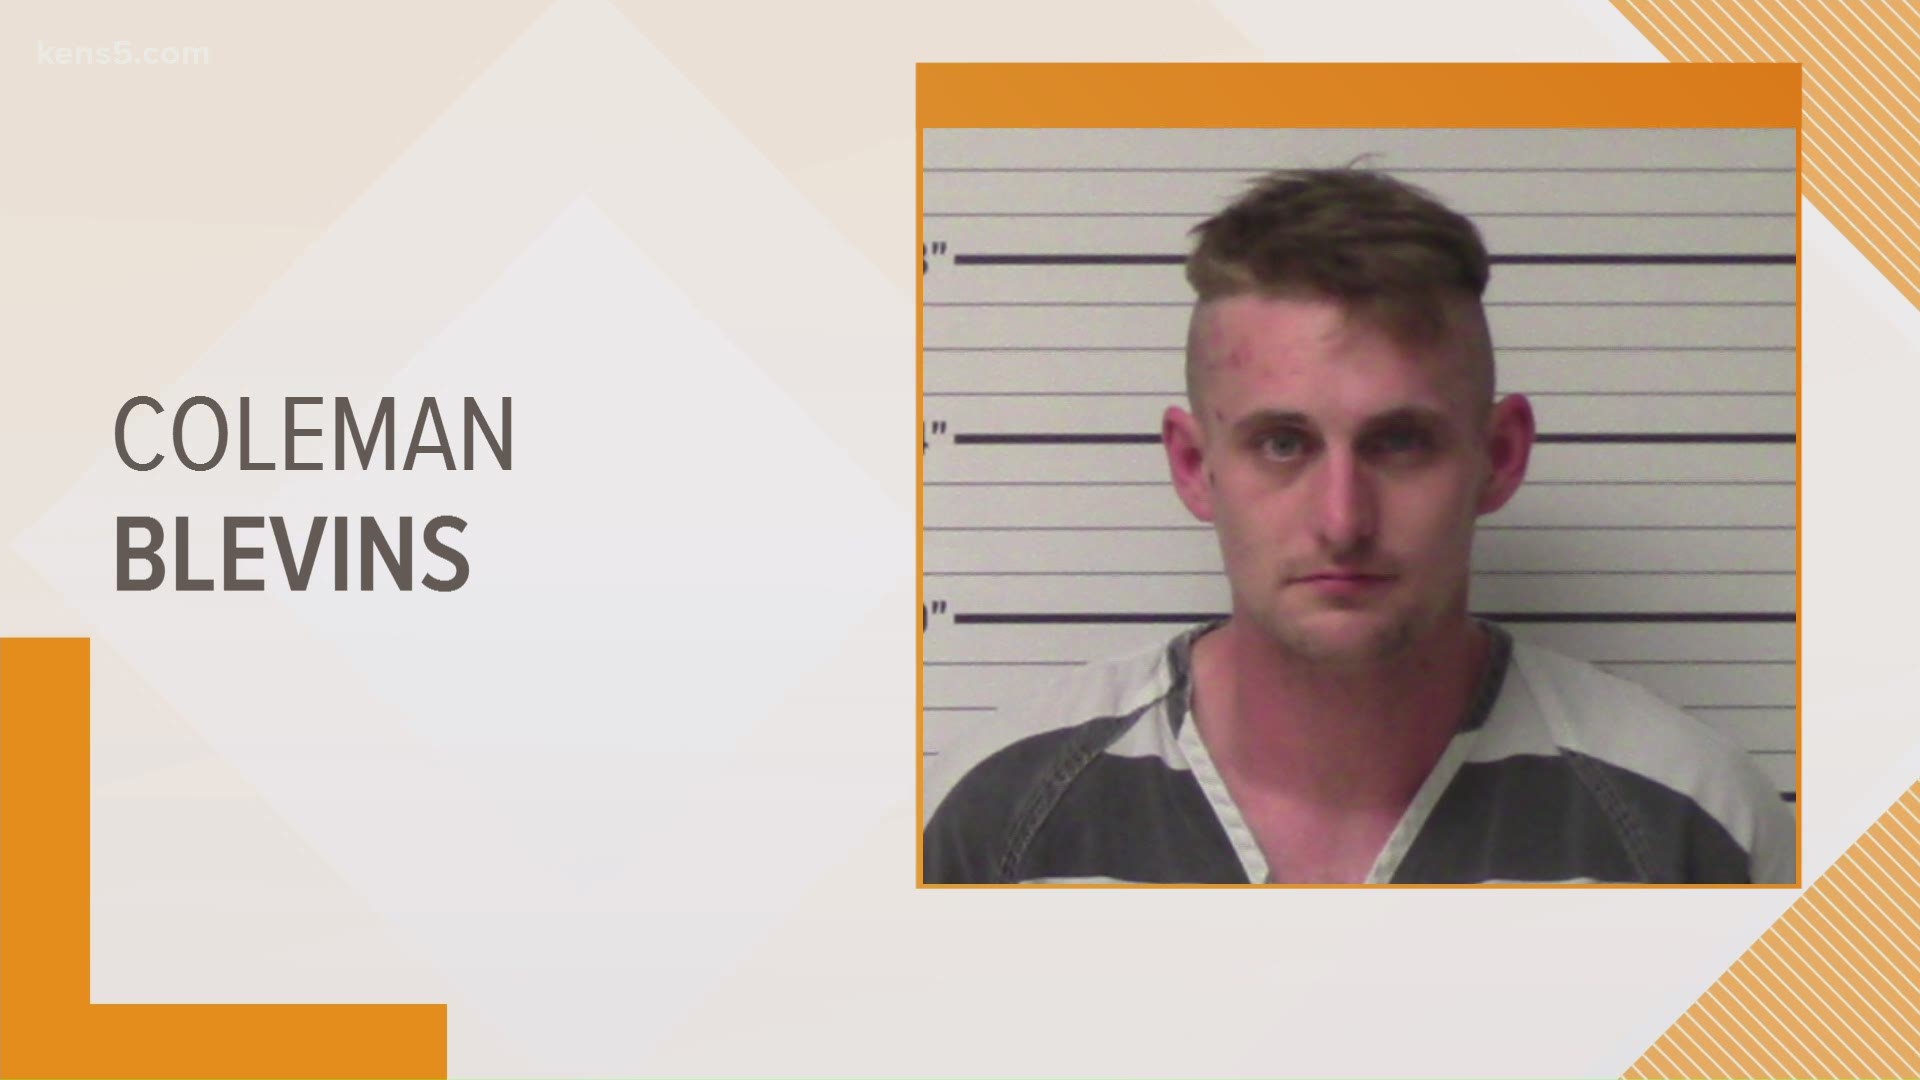 Coleman Thomas Blevins, 28, was arrested after an alleged plot to carry out a mass shooting at a Walmart, authorities said.